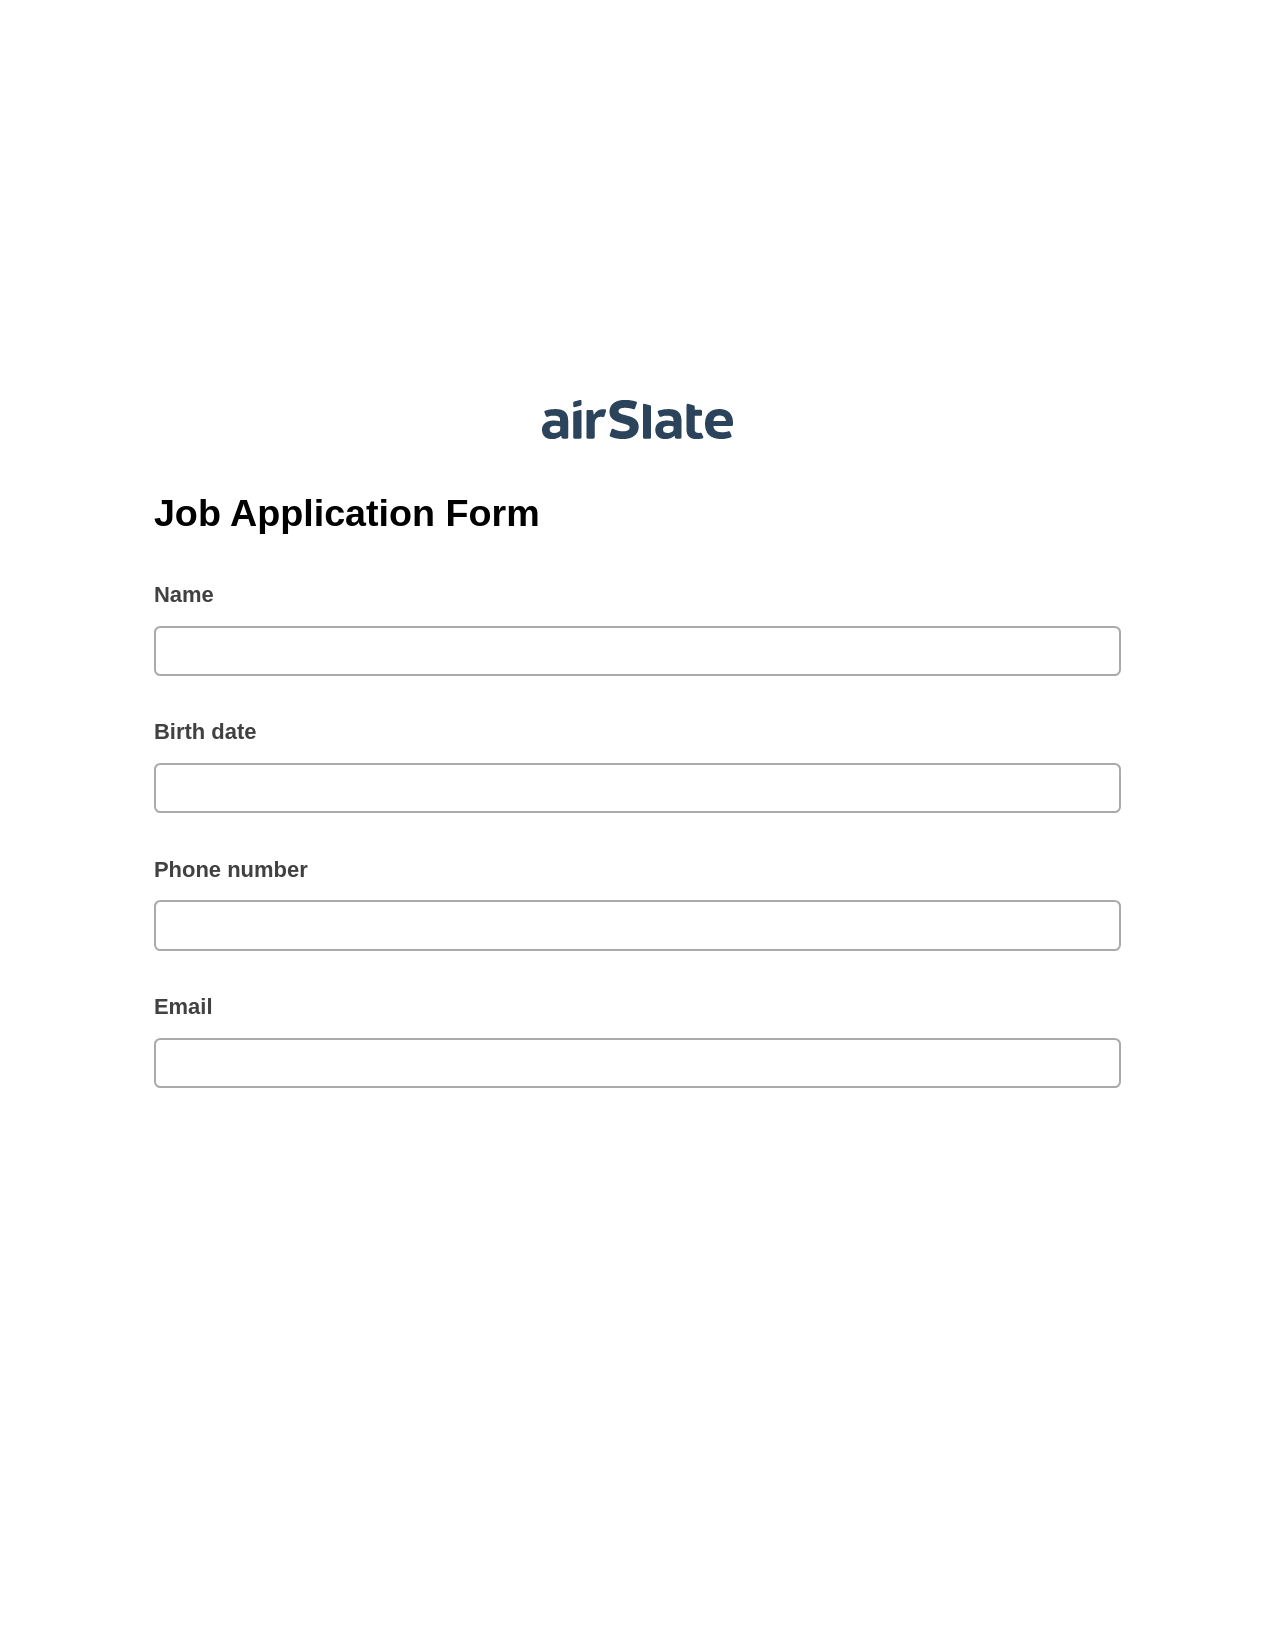 Job Application Form Pre-fill from Salesforce Records with SOQL Bot, Audit Trail Bot, Webhook Postfinish Bot